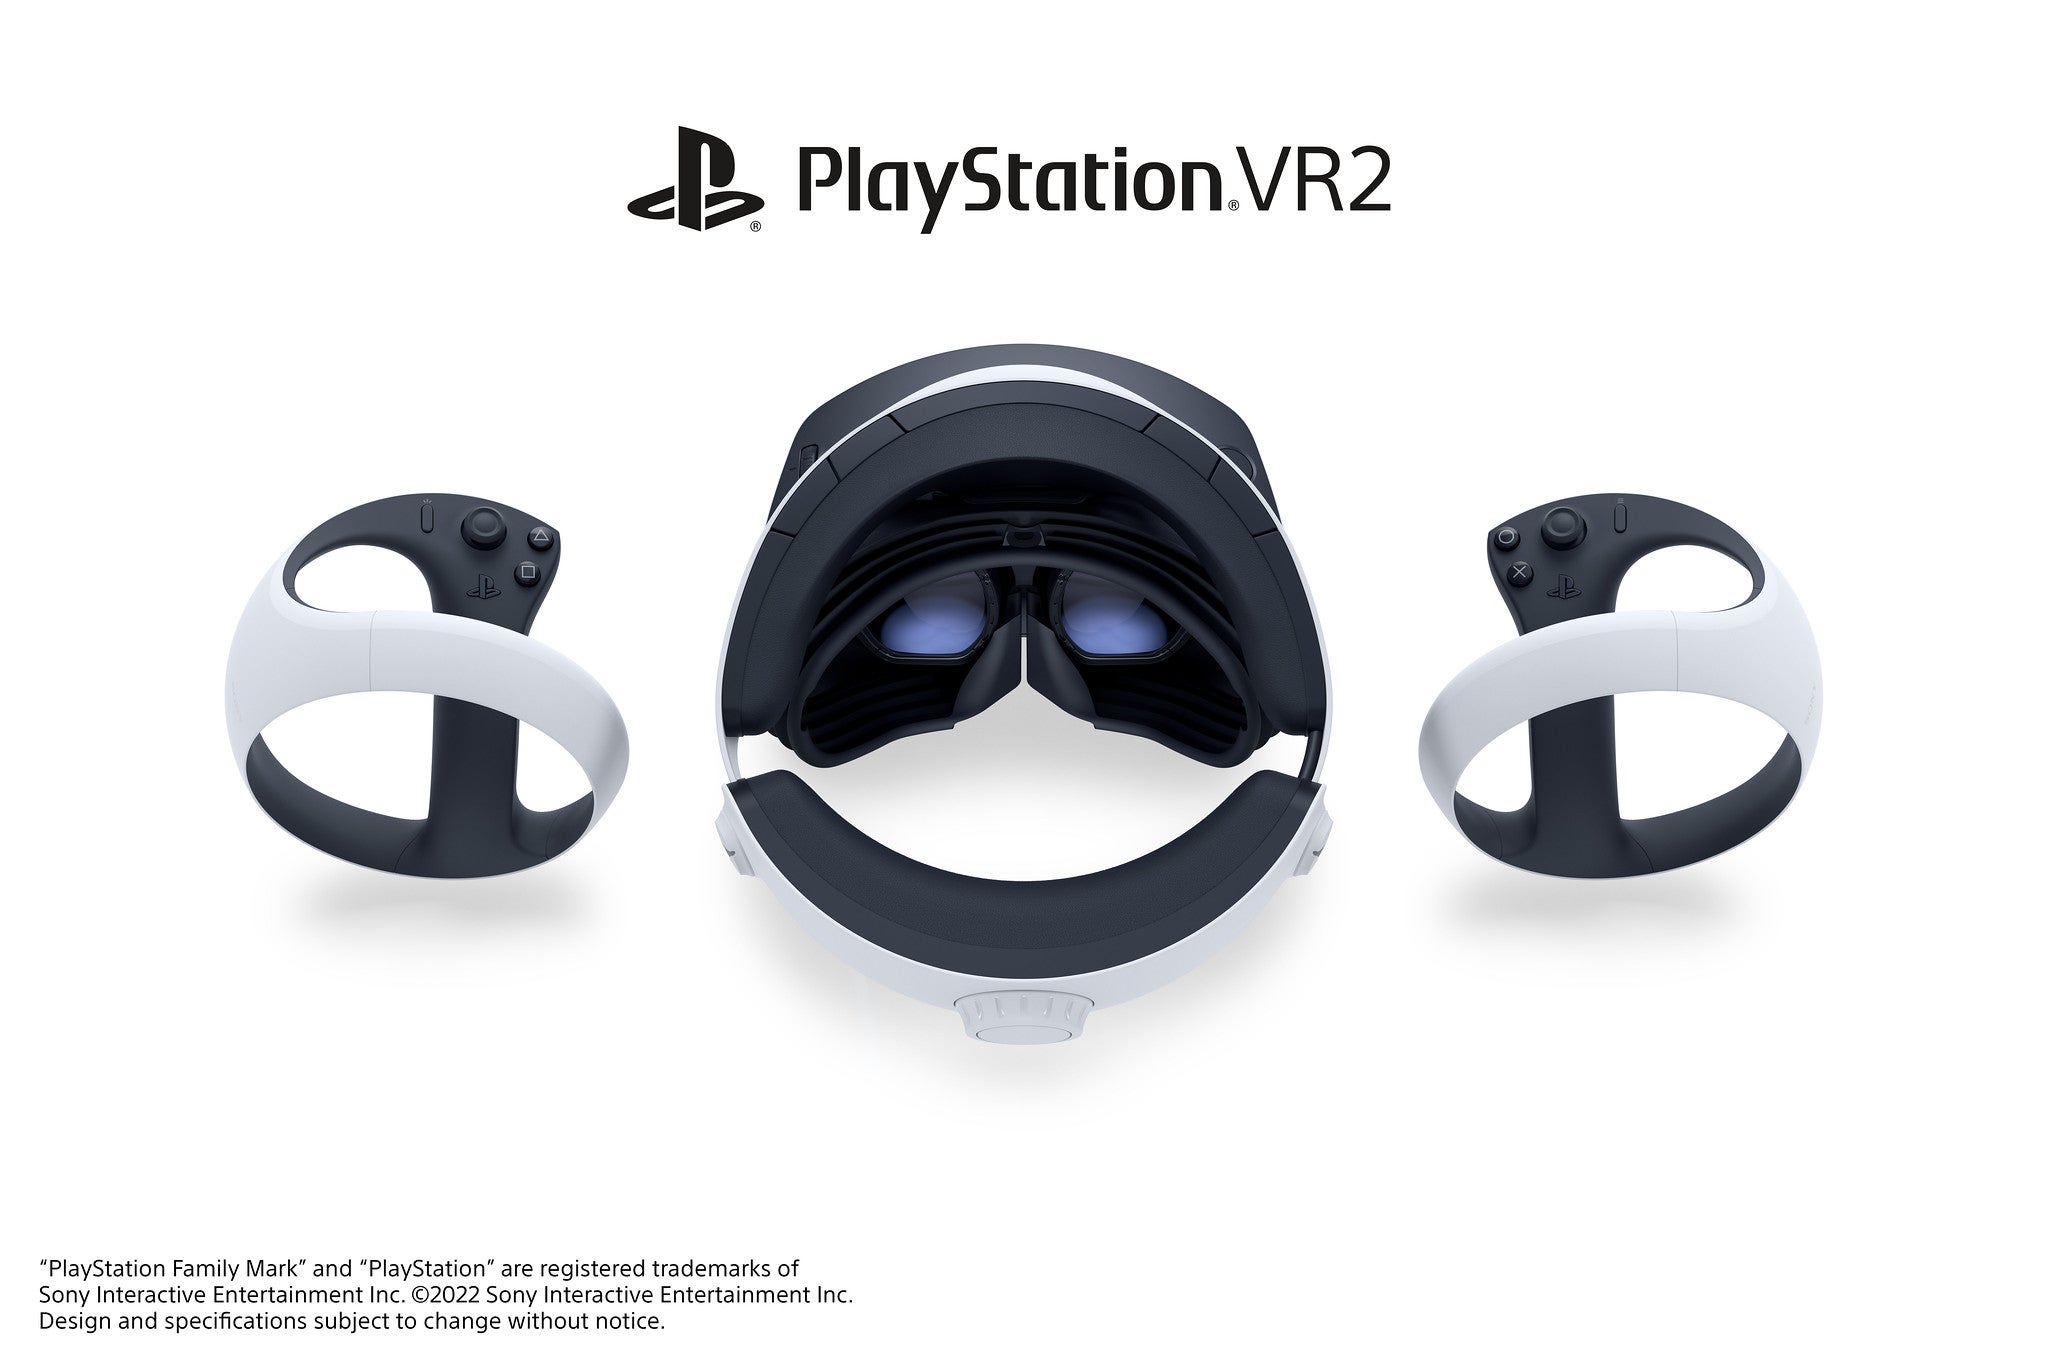 PSVR 2 specs and features - everything we know so far